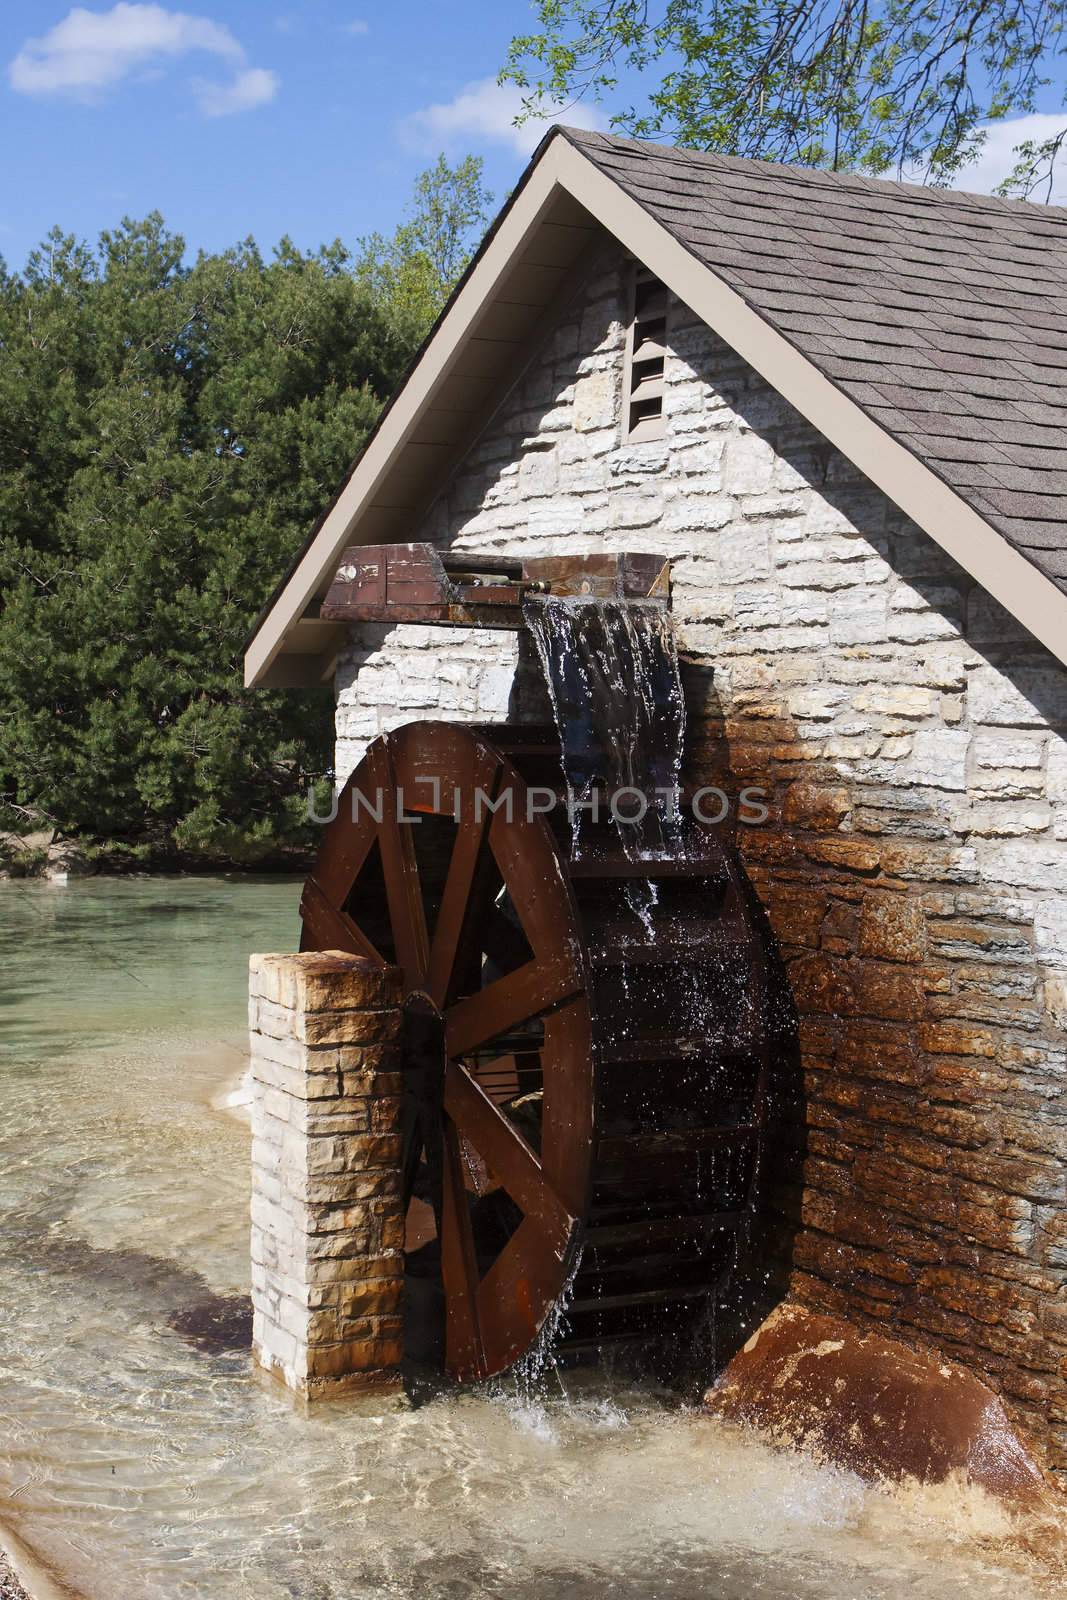 Water Wheel turns as water goes over it.